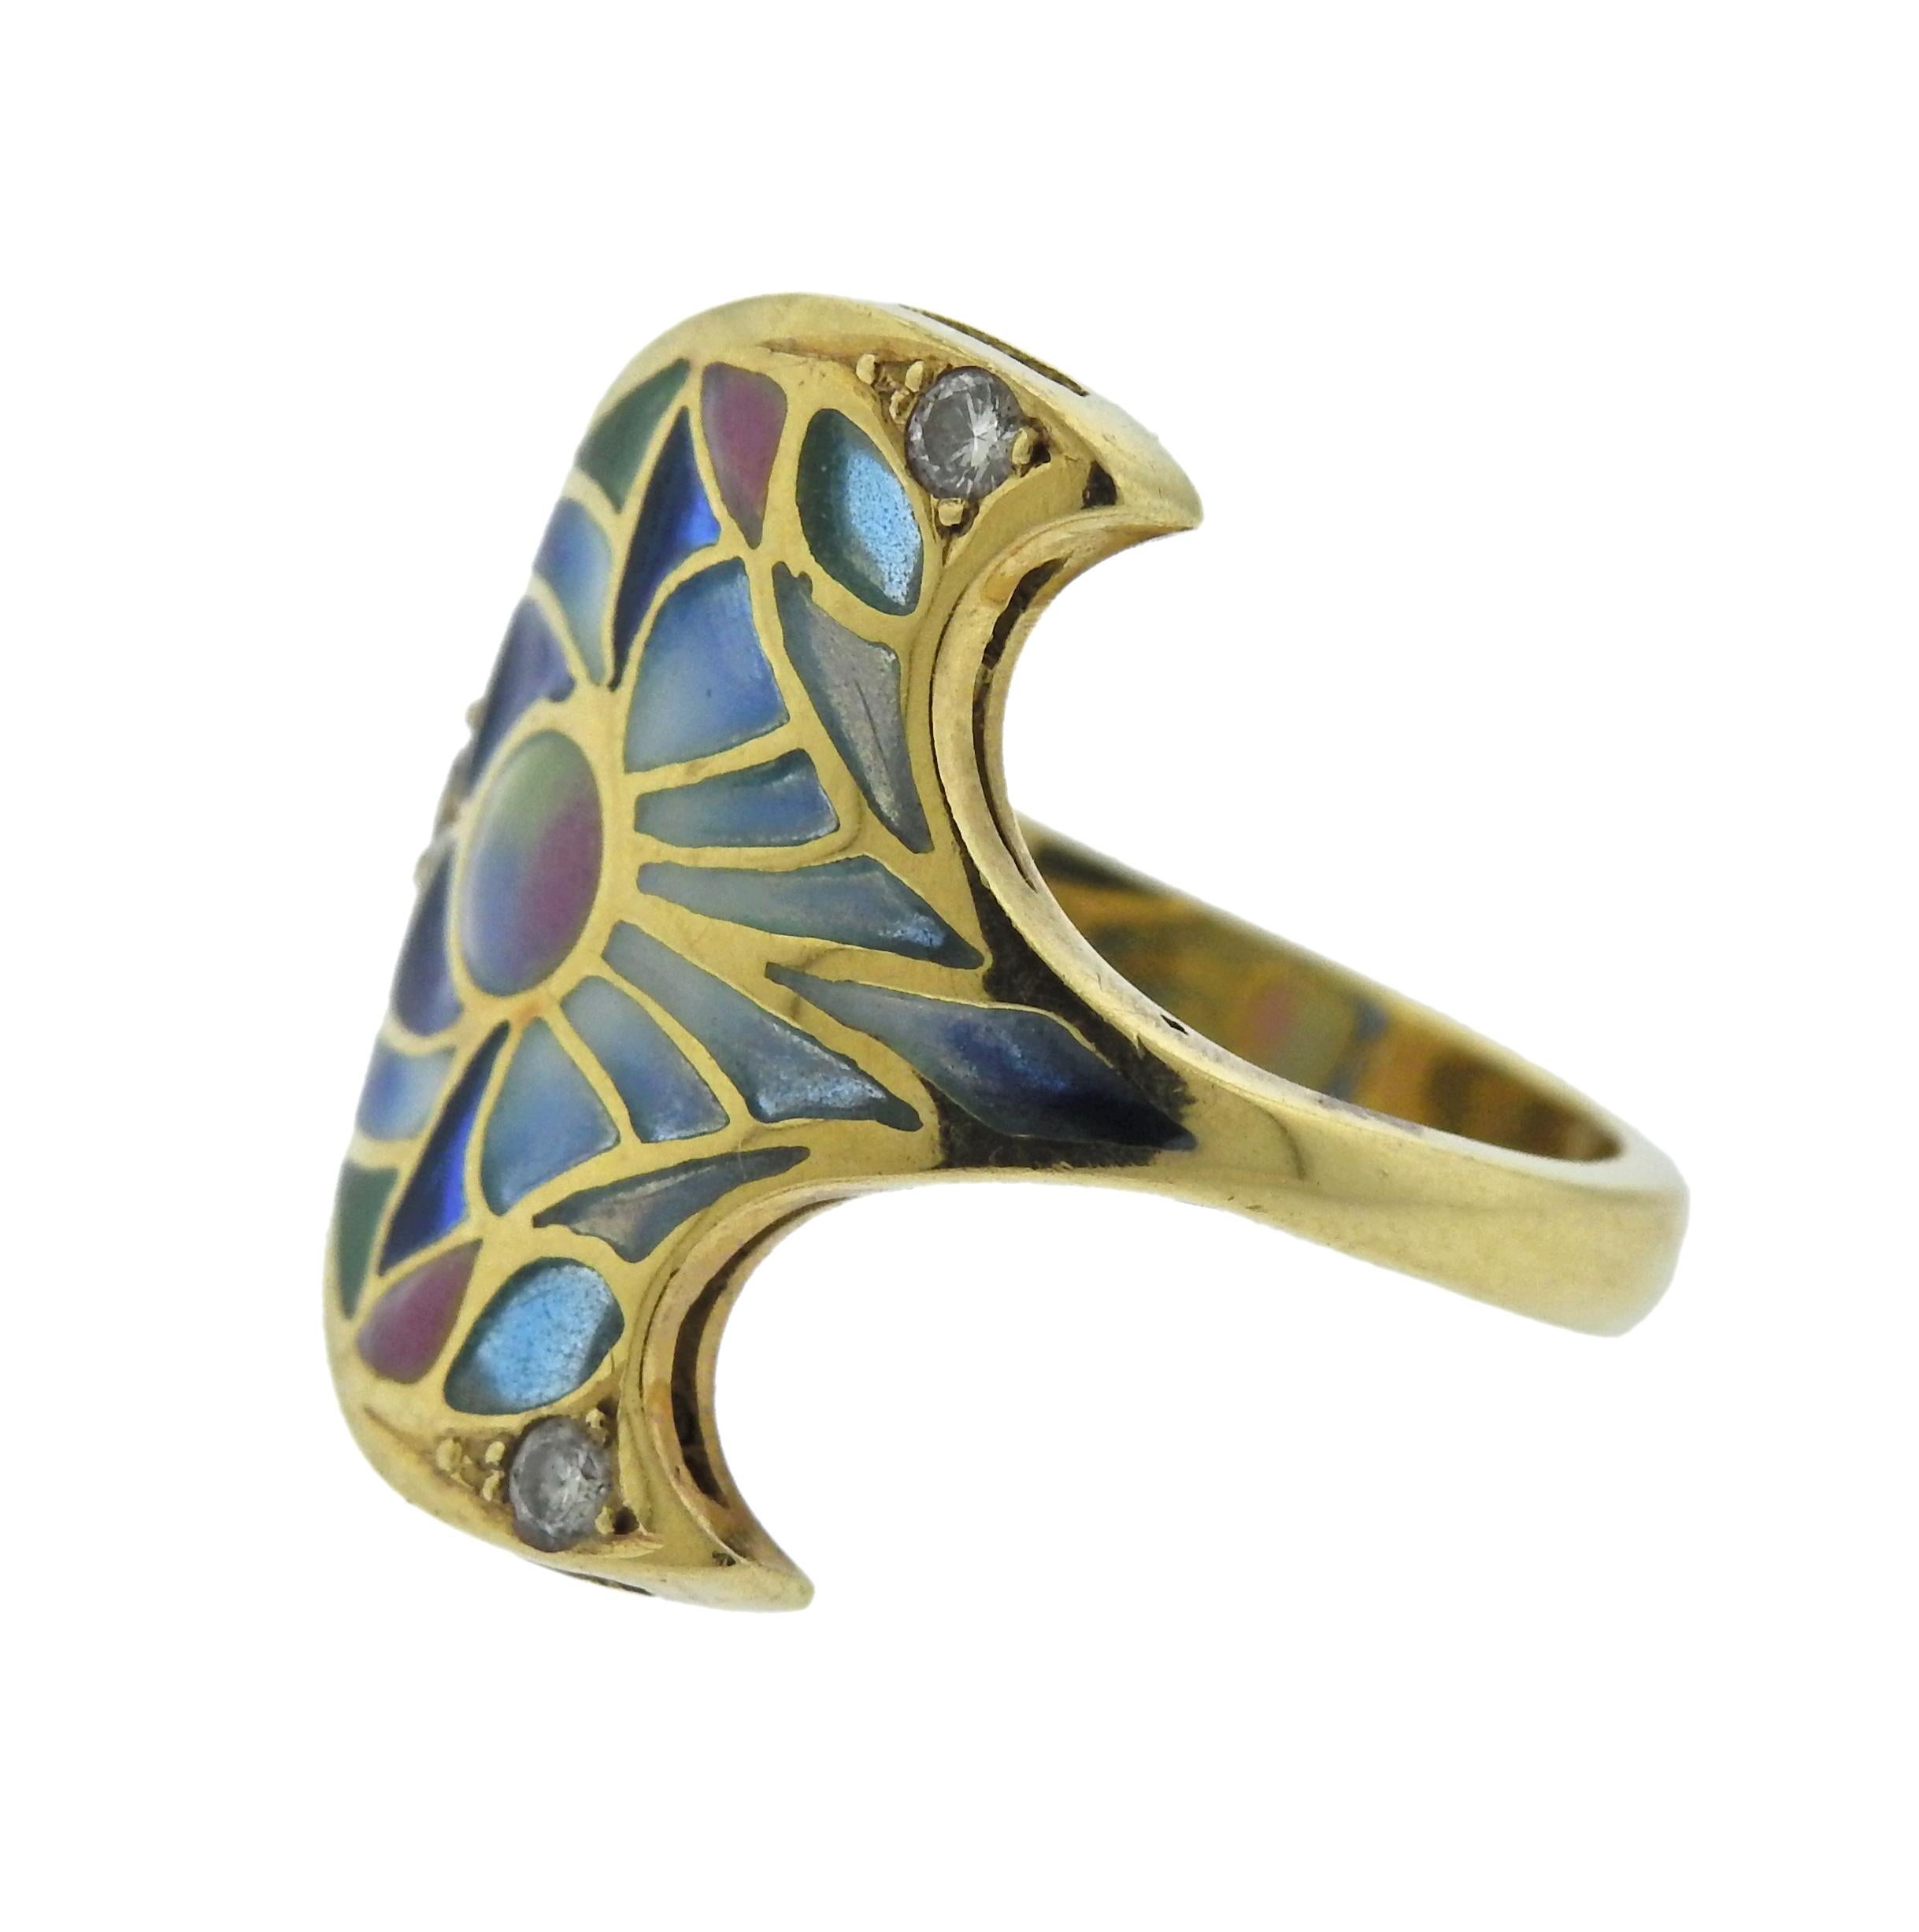 Impressive 18k gold ring, featuring Plique-a-Jour enamel design, adorned with a total of approx. 0.09ctw in VS-SI/H diamonds.
More items from the set are listed separately - please see last photo
Ring size - 6, ring top is 20mm x 15mm, weight is 7.5